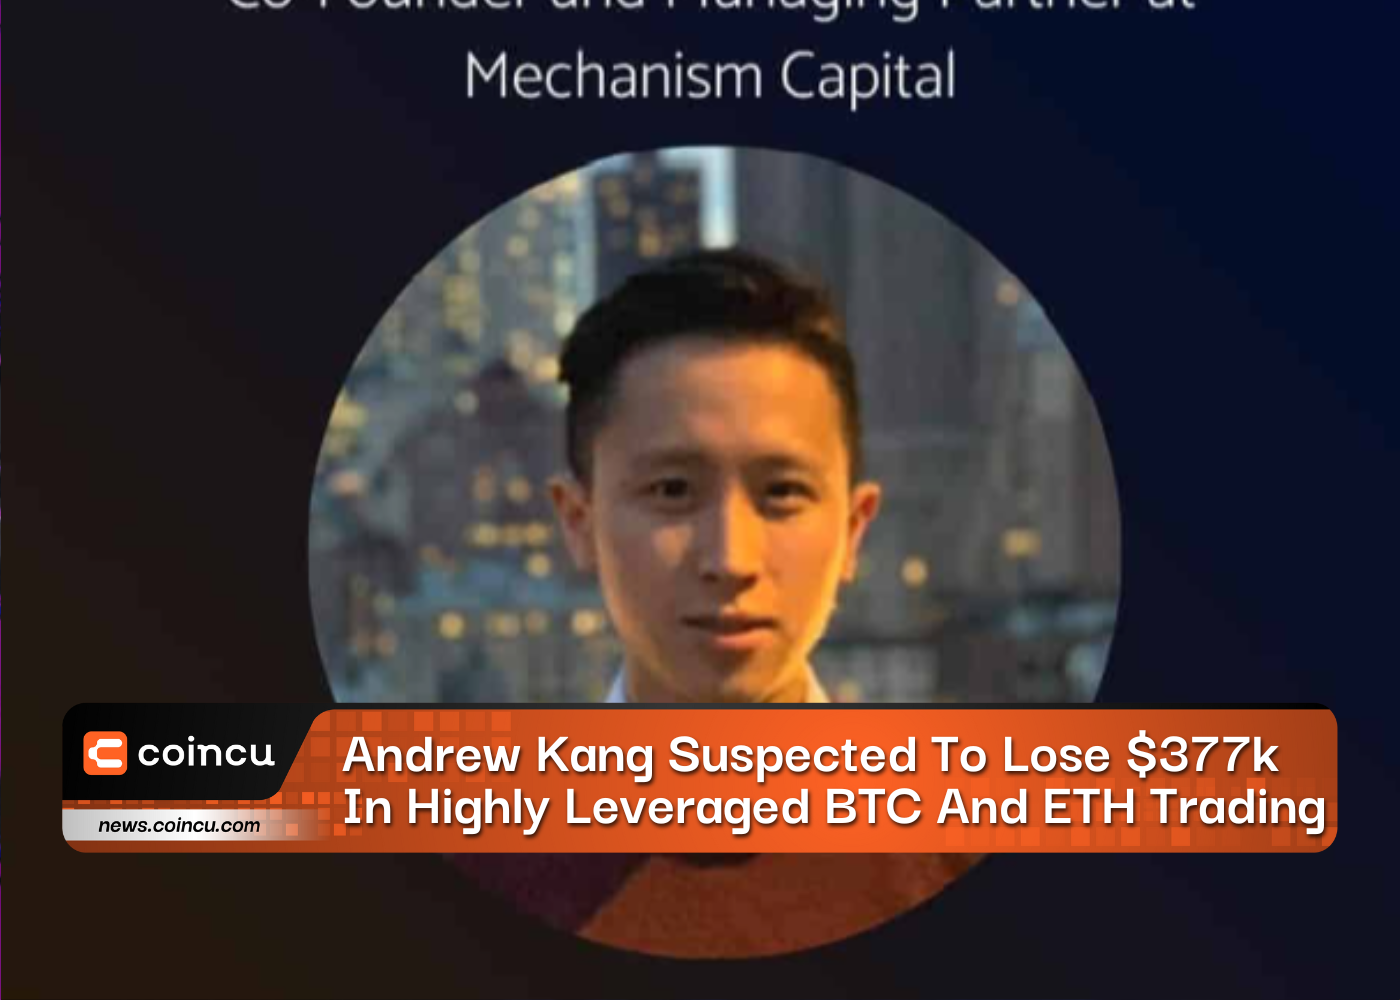 Andrew Kang Suspected To Lose $377k In Highly Leveraged BTC And ETH Trading